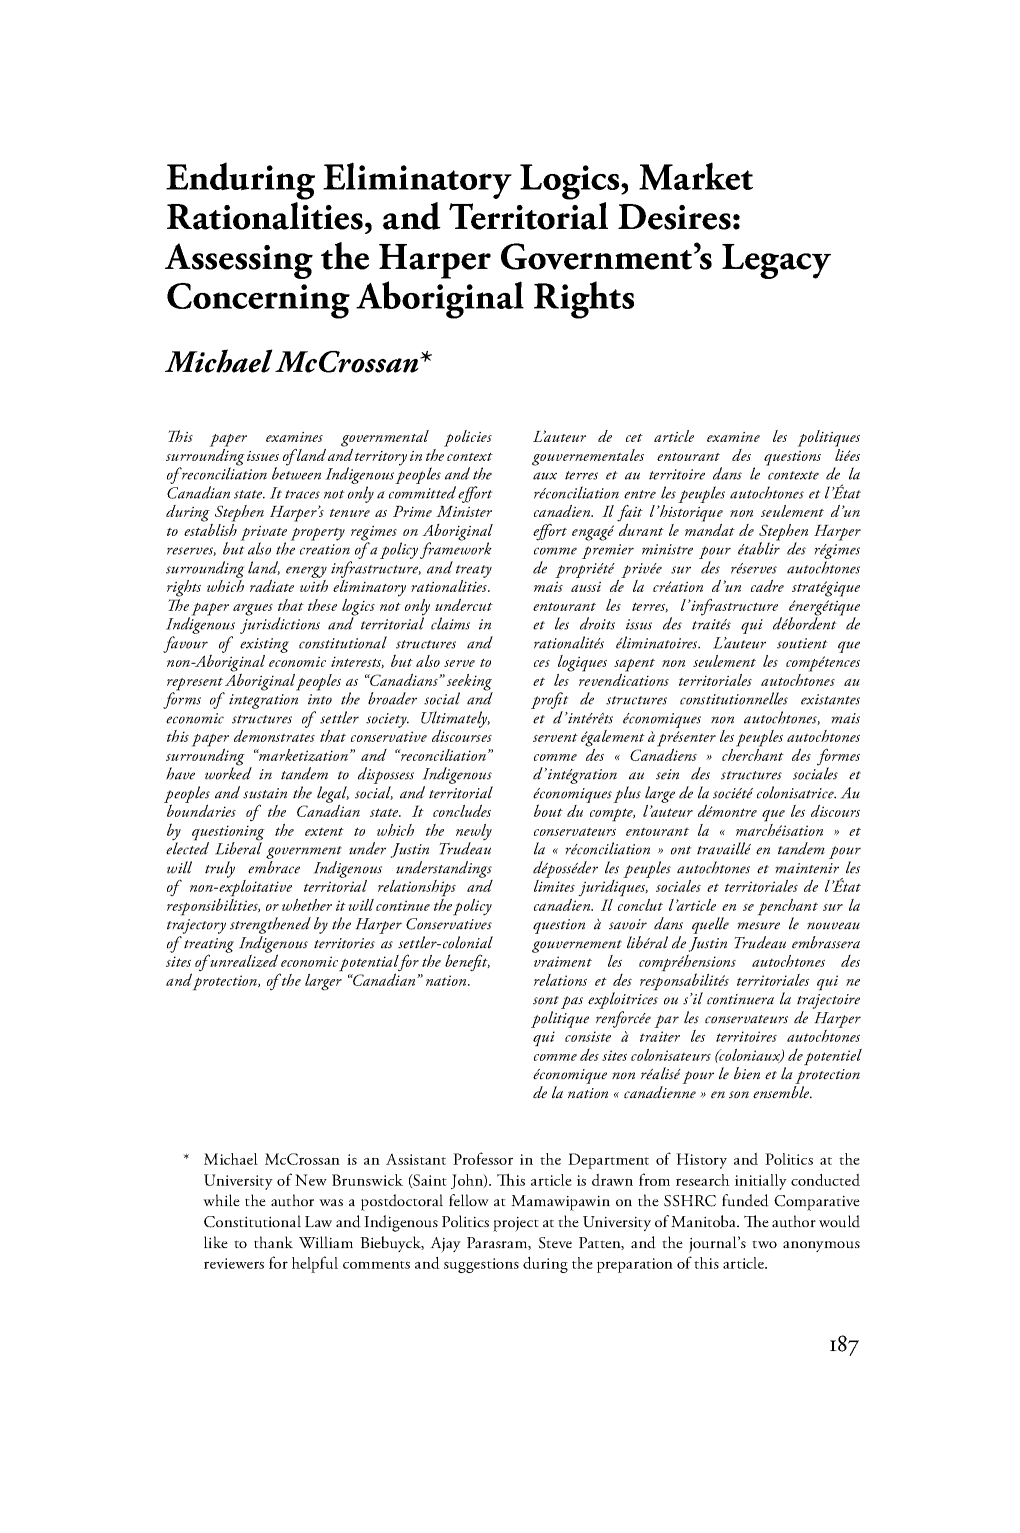 Enduring Eliminatory Logics, Market Rationalities, and Territorial Desires: Assessing the Harper Government's Legacy Concerning Aboriginal Rights